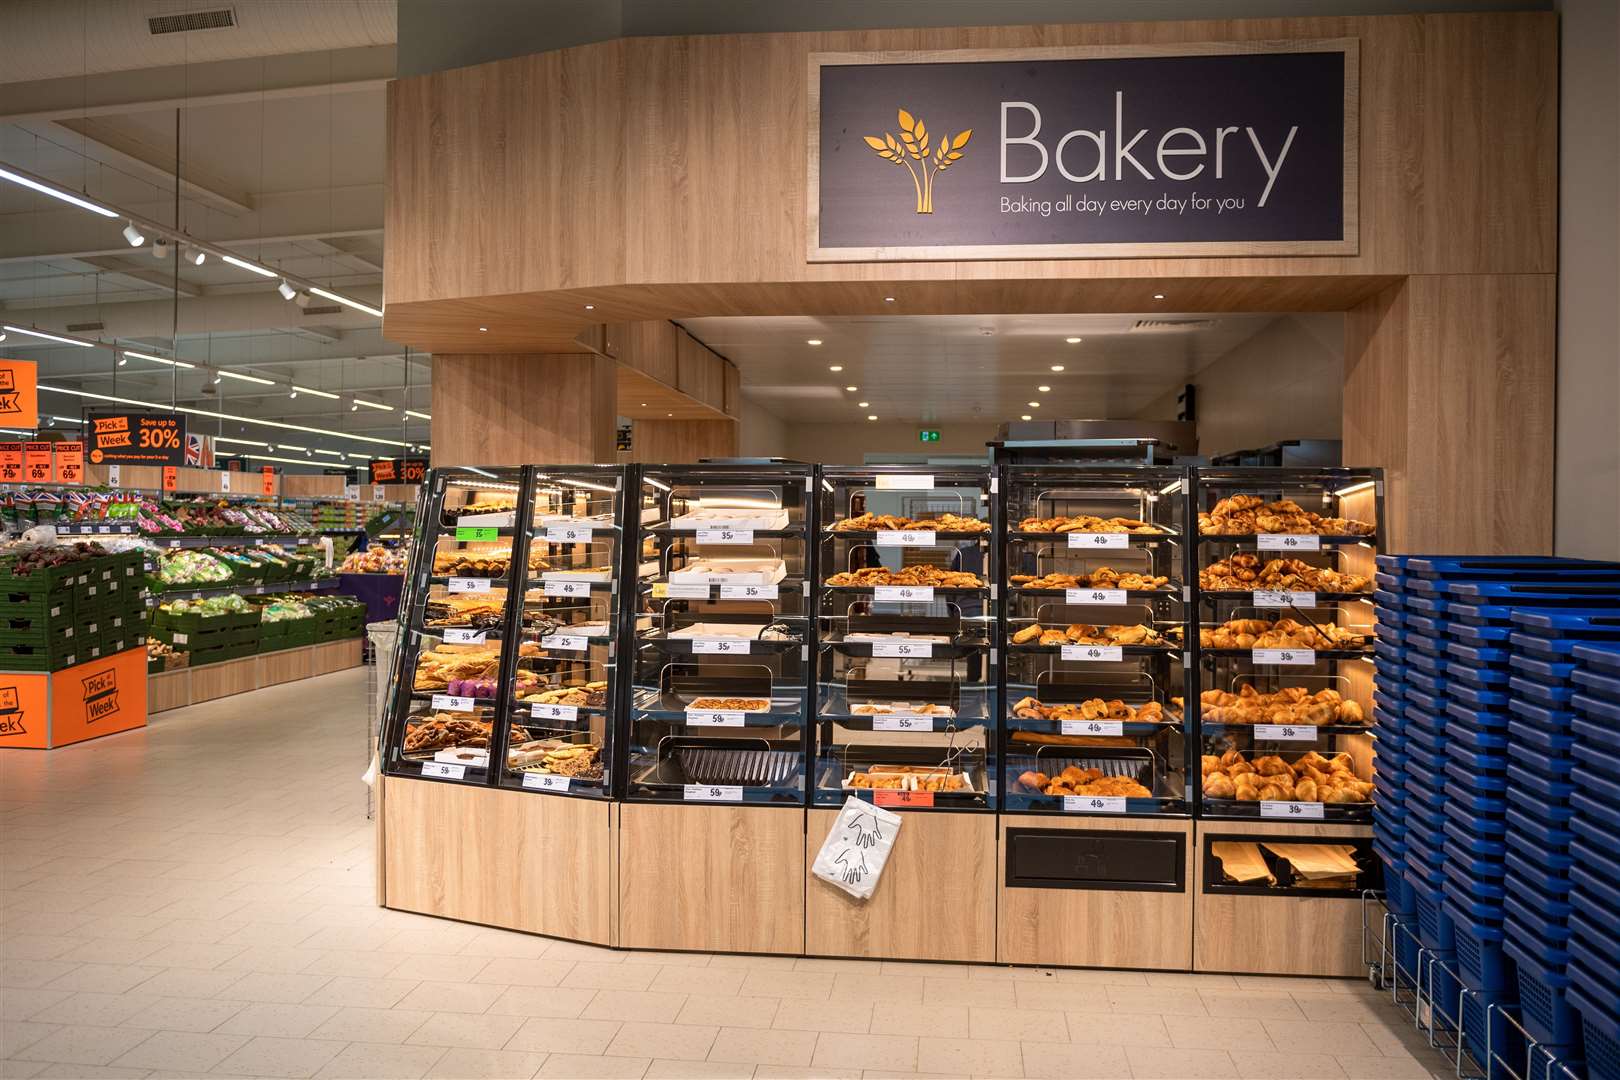 Lidl's signature bakery complete with rolls and pastries. Picture: Lidl / CPG Photography